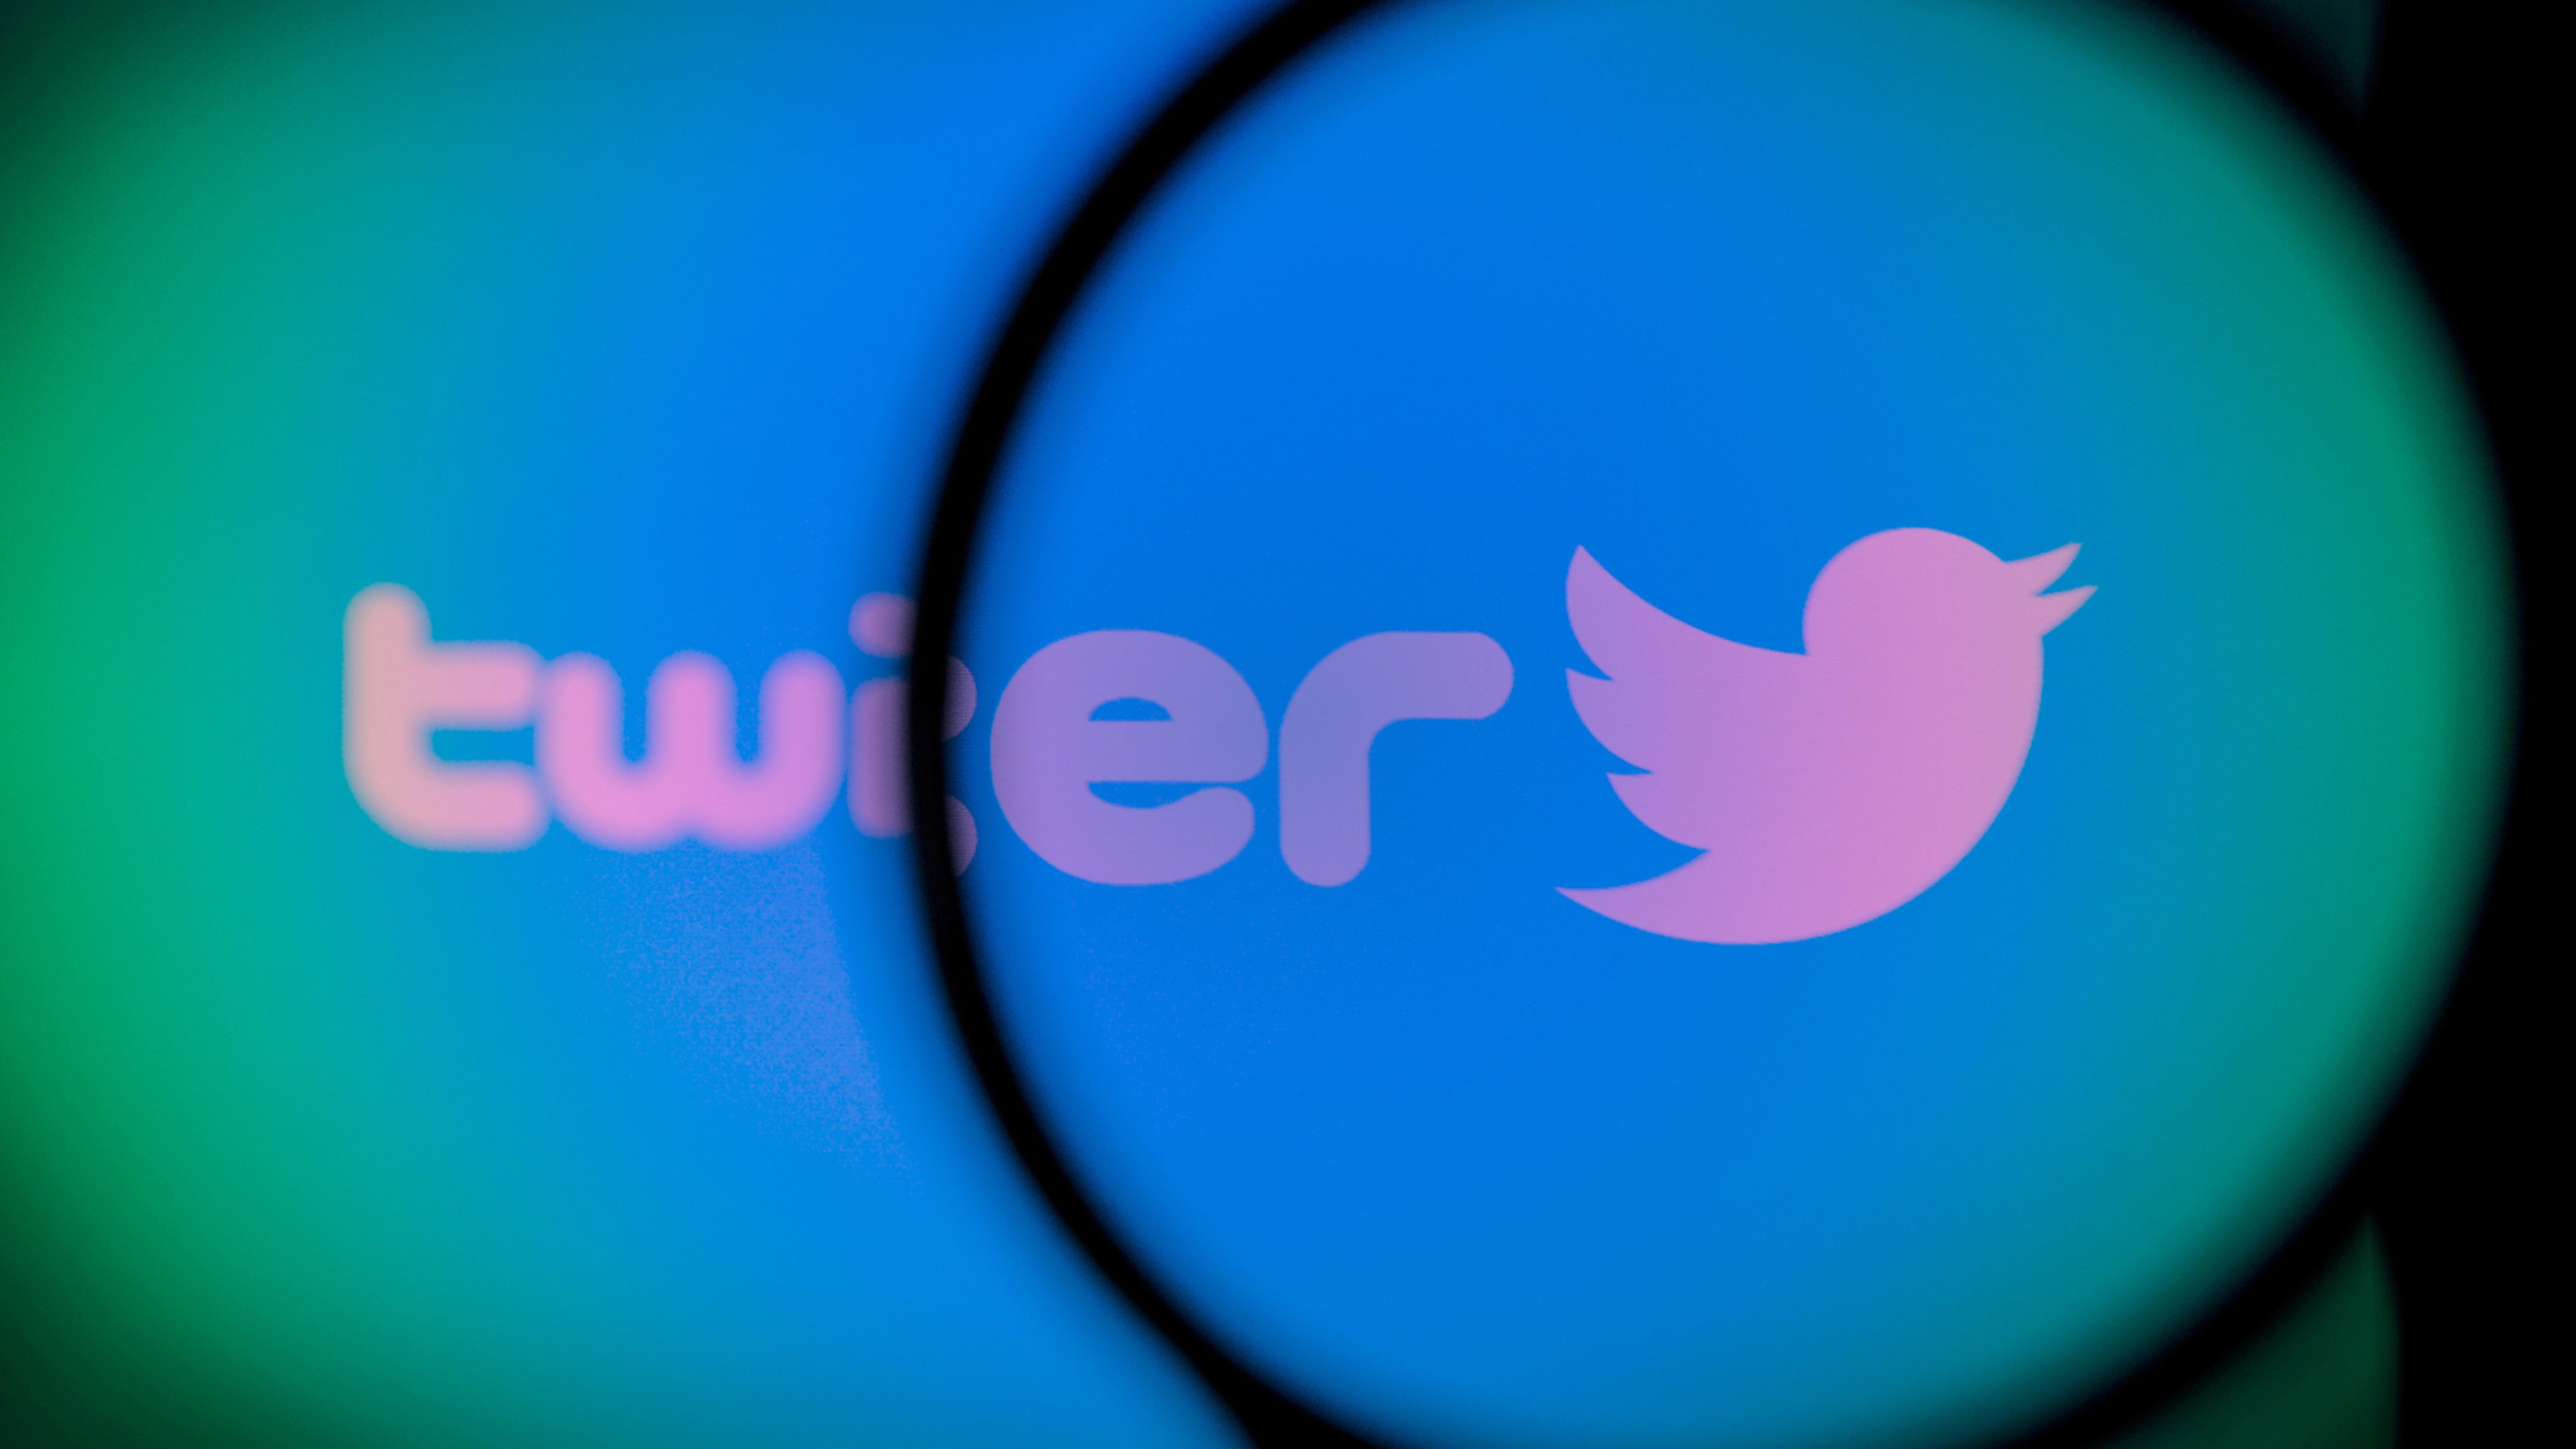 Verified on Twitter? These vague violations could cost you your blue checkmark